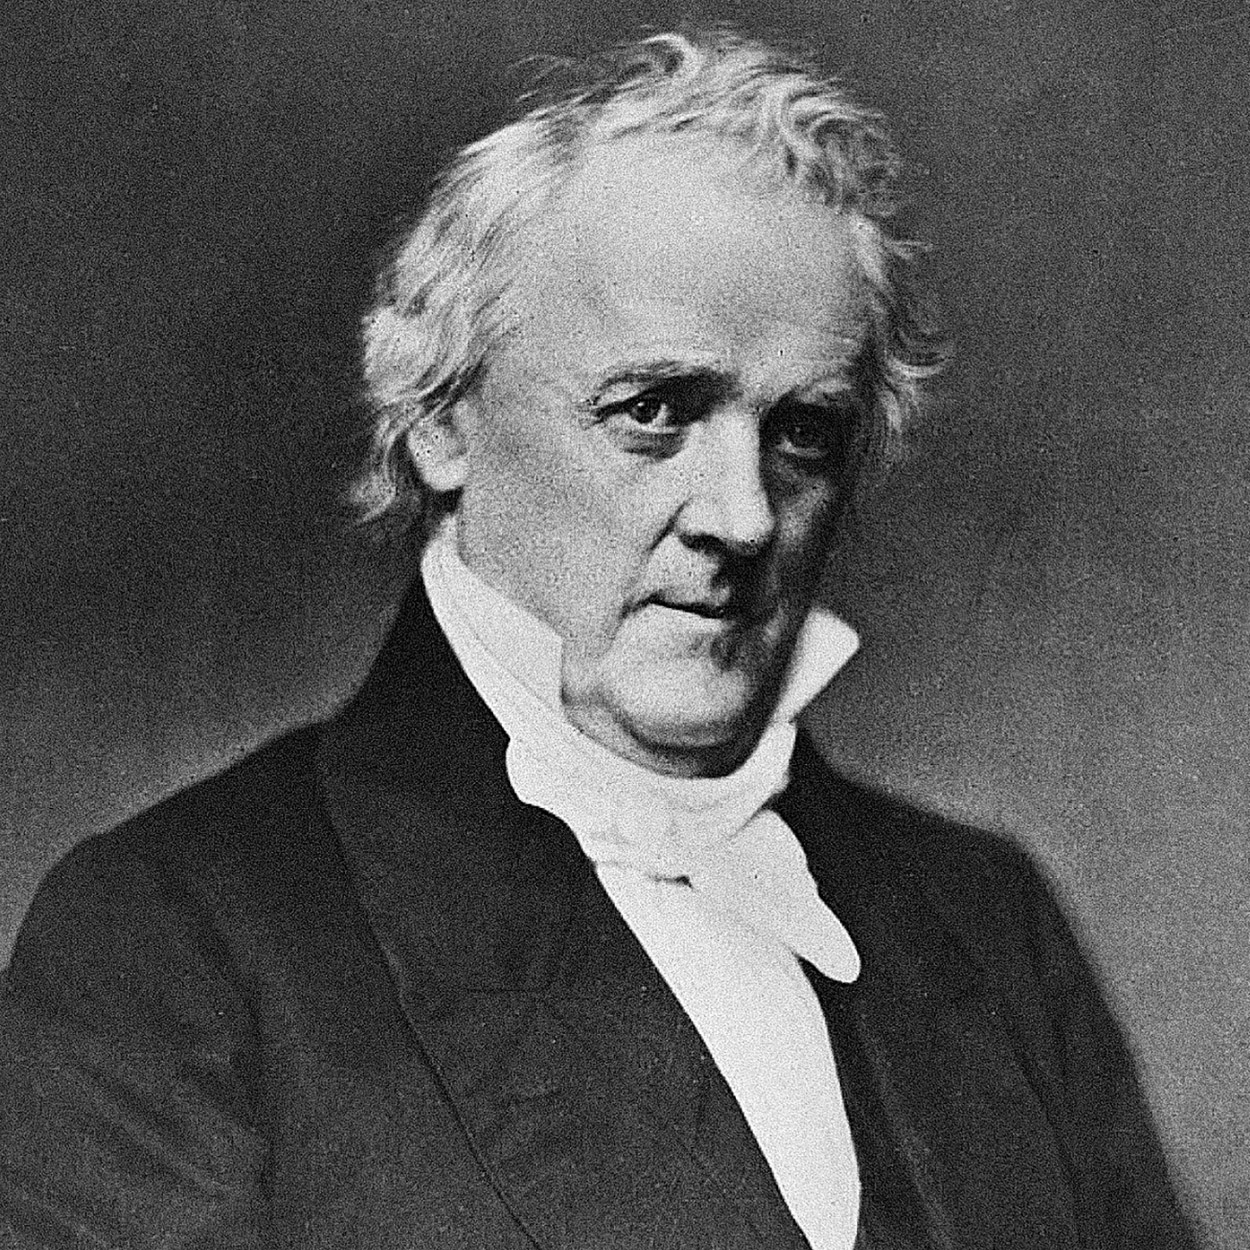 Portrait of James Buchanan, the 15th President of the United States